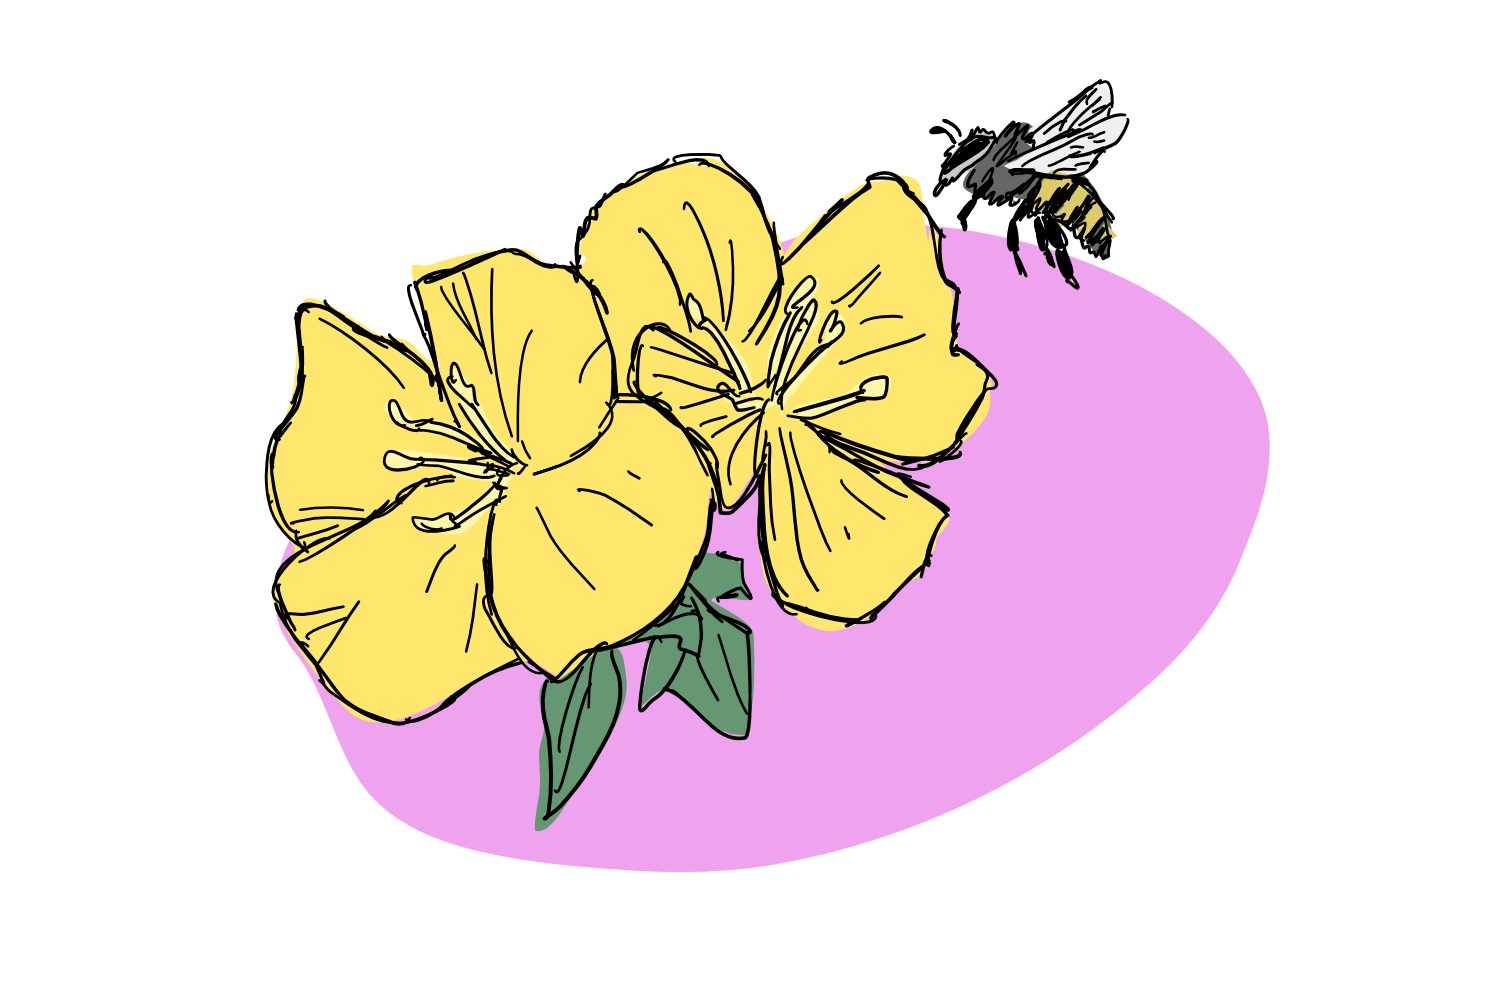 My bees bring all the sugar to the flower